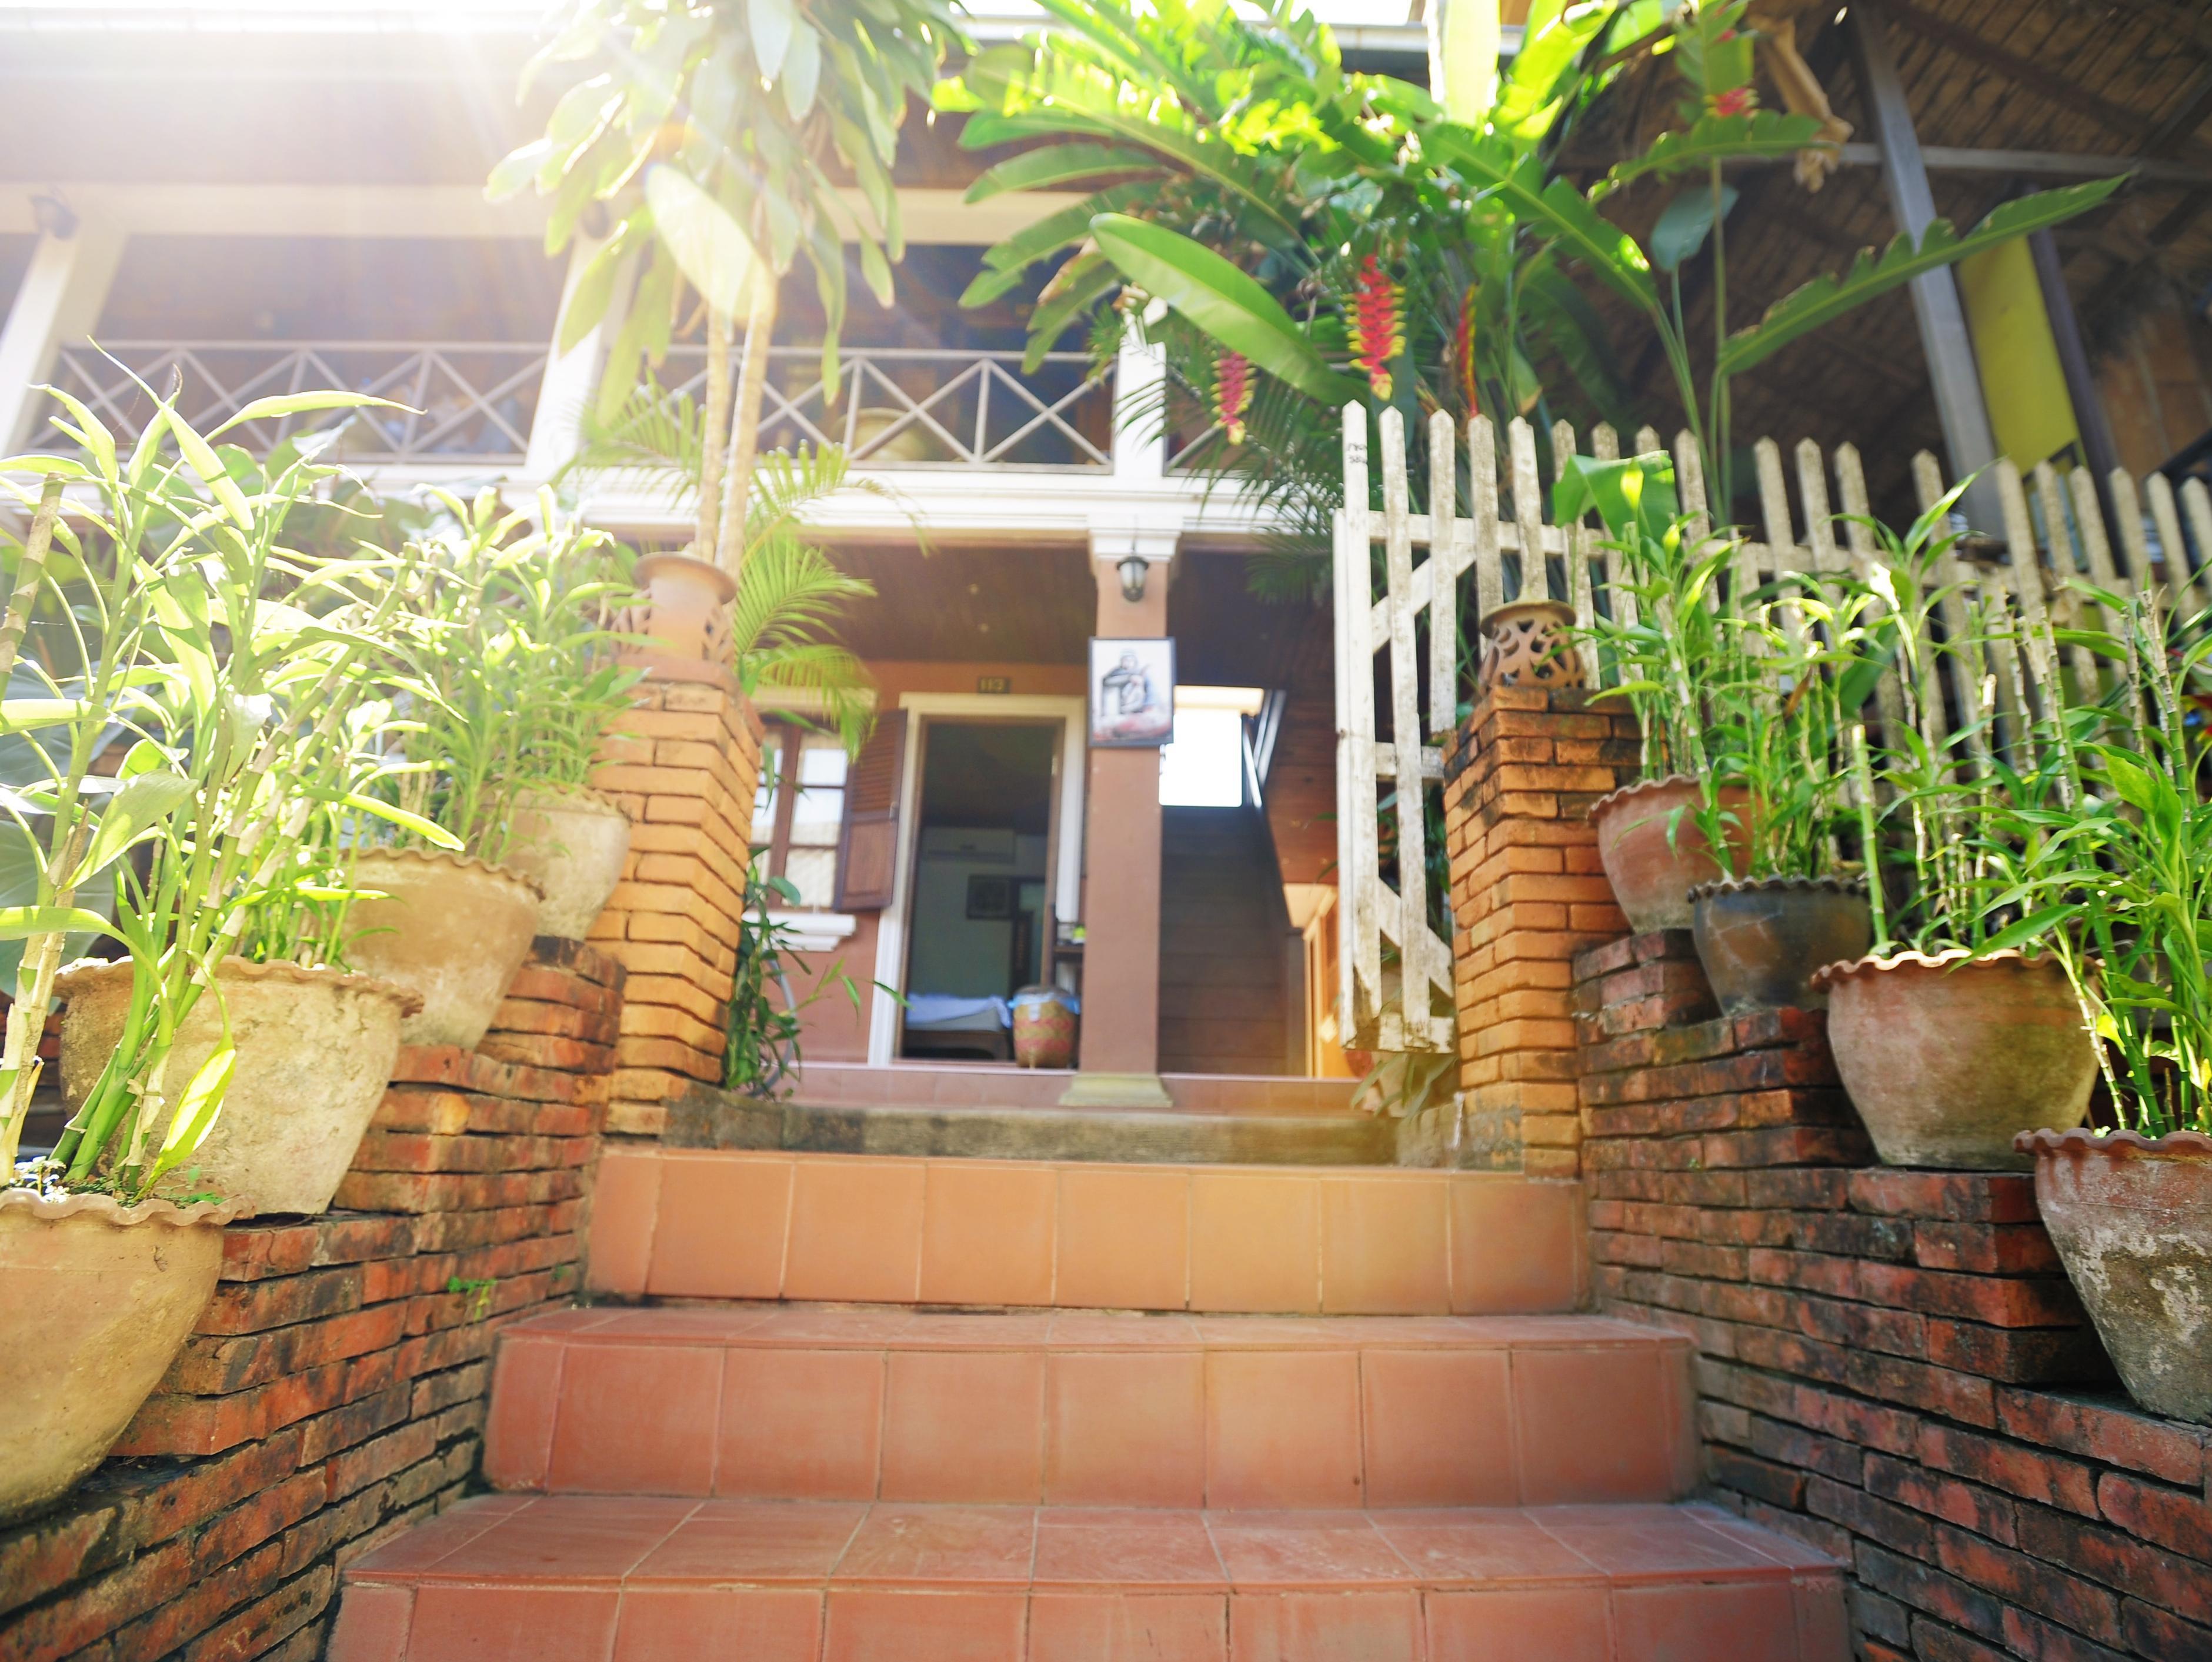 Joy Guest House Luang Prabang FAQ 2016, What facilities are there in Joy Guest House Luang Prabang 2016, What Languages Spoken are Supported in Joy Guest House Luang Prabang 2016, Which payment cards are accepted in Joy Guest House Luang Prabang , Luang Prabang Joy Guest House room facilities and services Q&A 2016, Luang Prabang Joy Guest House online booking services 2016, Luang Prabang Joy Guest House address 2016, Luang Prabang Joy Guest House telephone number 2016,Luang Prabang Joy Guest House map 2016, Luang Prabang Joy Guest House traffic guide 2016, how to go Luang Prabang Joy Guest House, Luang Prabang Joy Guest House booking online 2016, Luang Prabang Joy Guest House room types 2016.